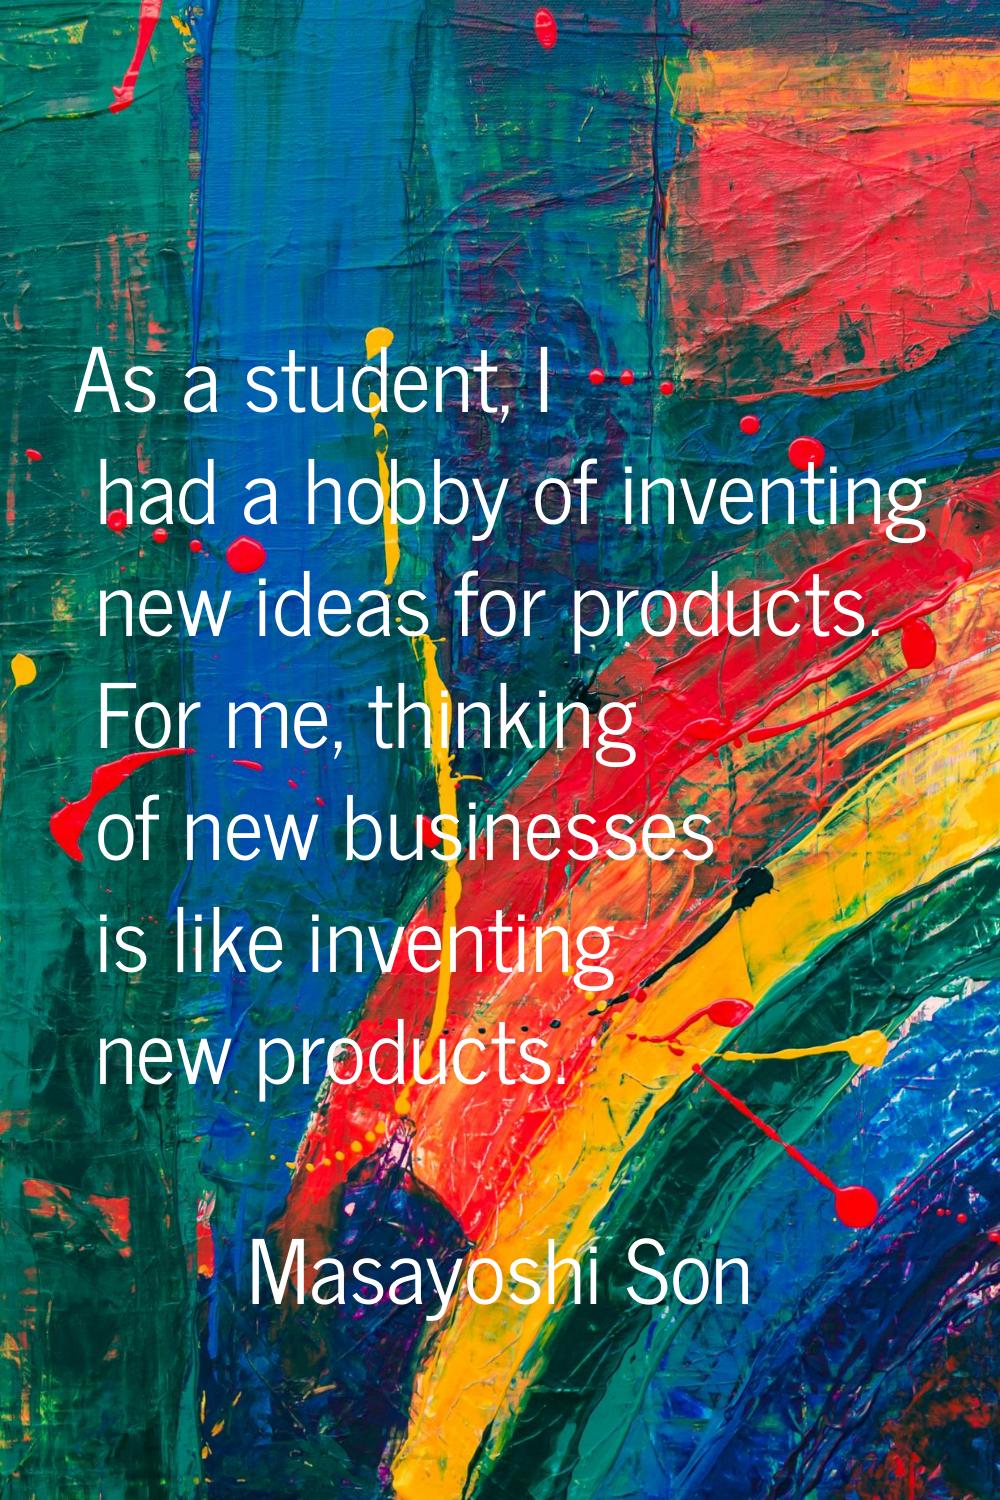 As a student, I had a hobby of inventing new ideas for products. For me, thinking of new businesses